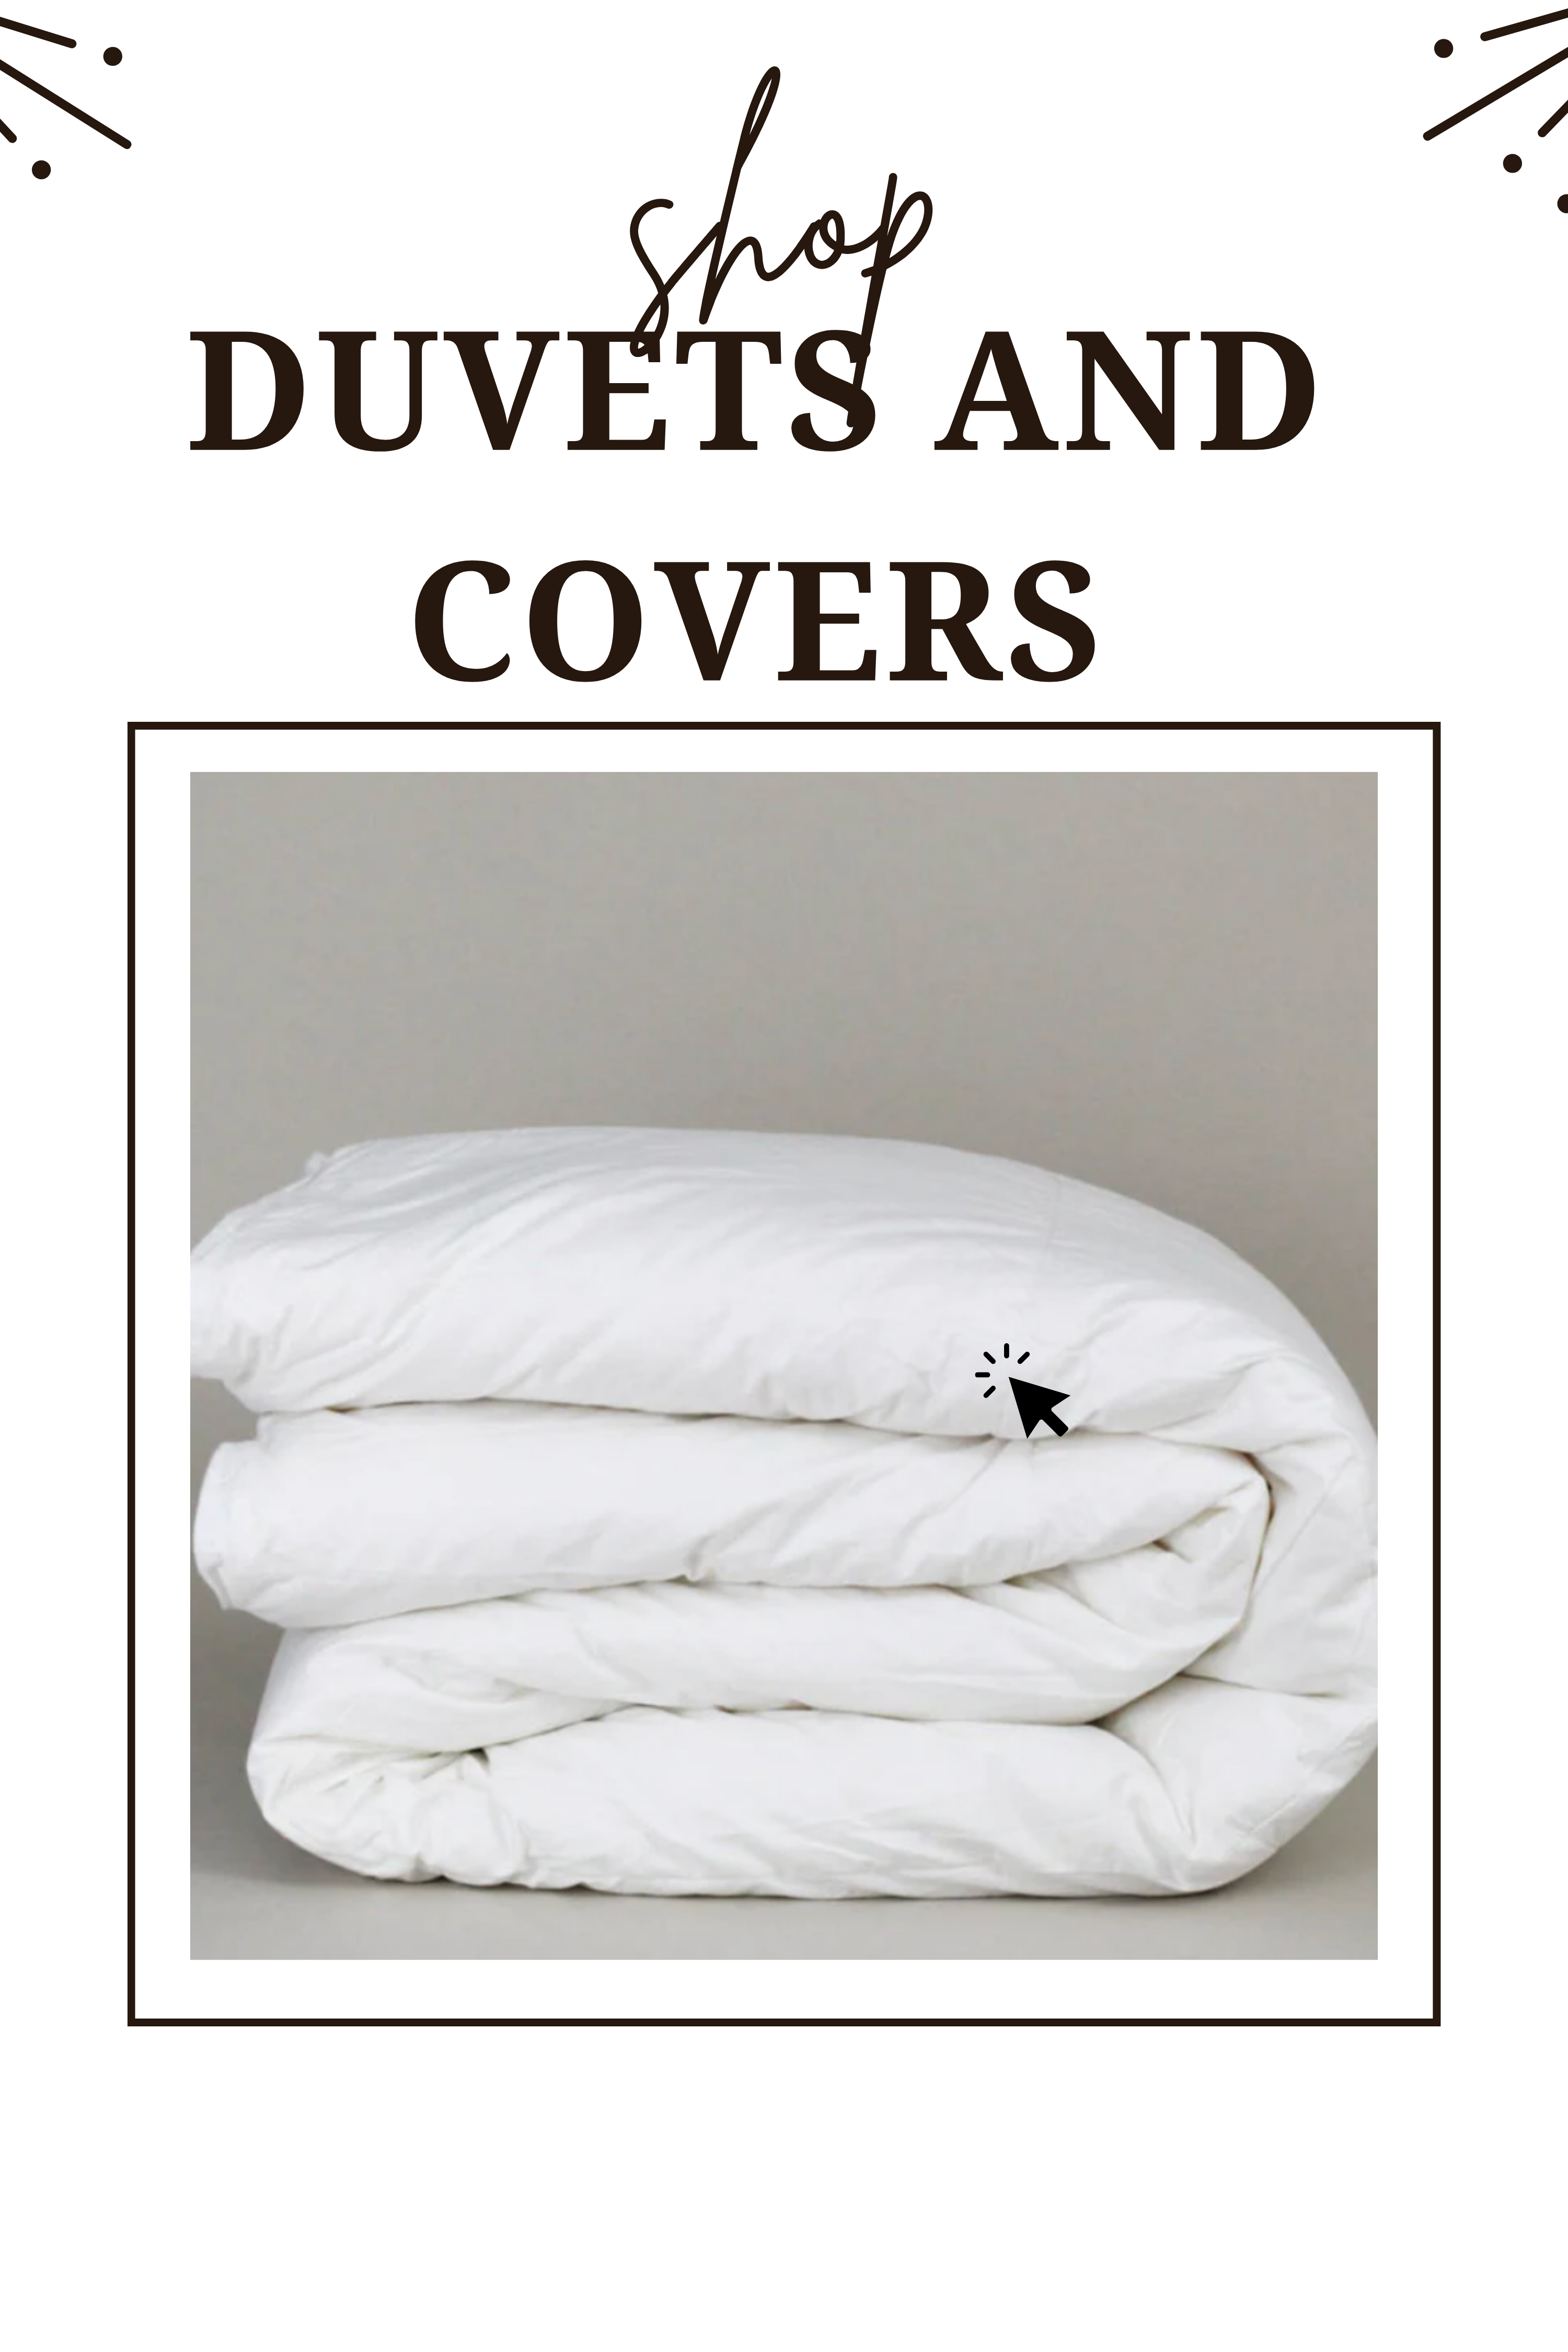 Shop duvet inserts and covers on pillows.com